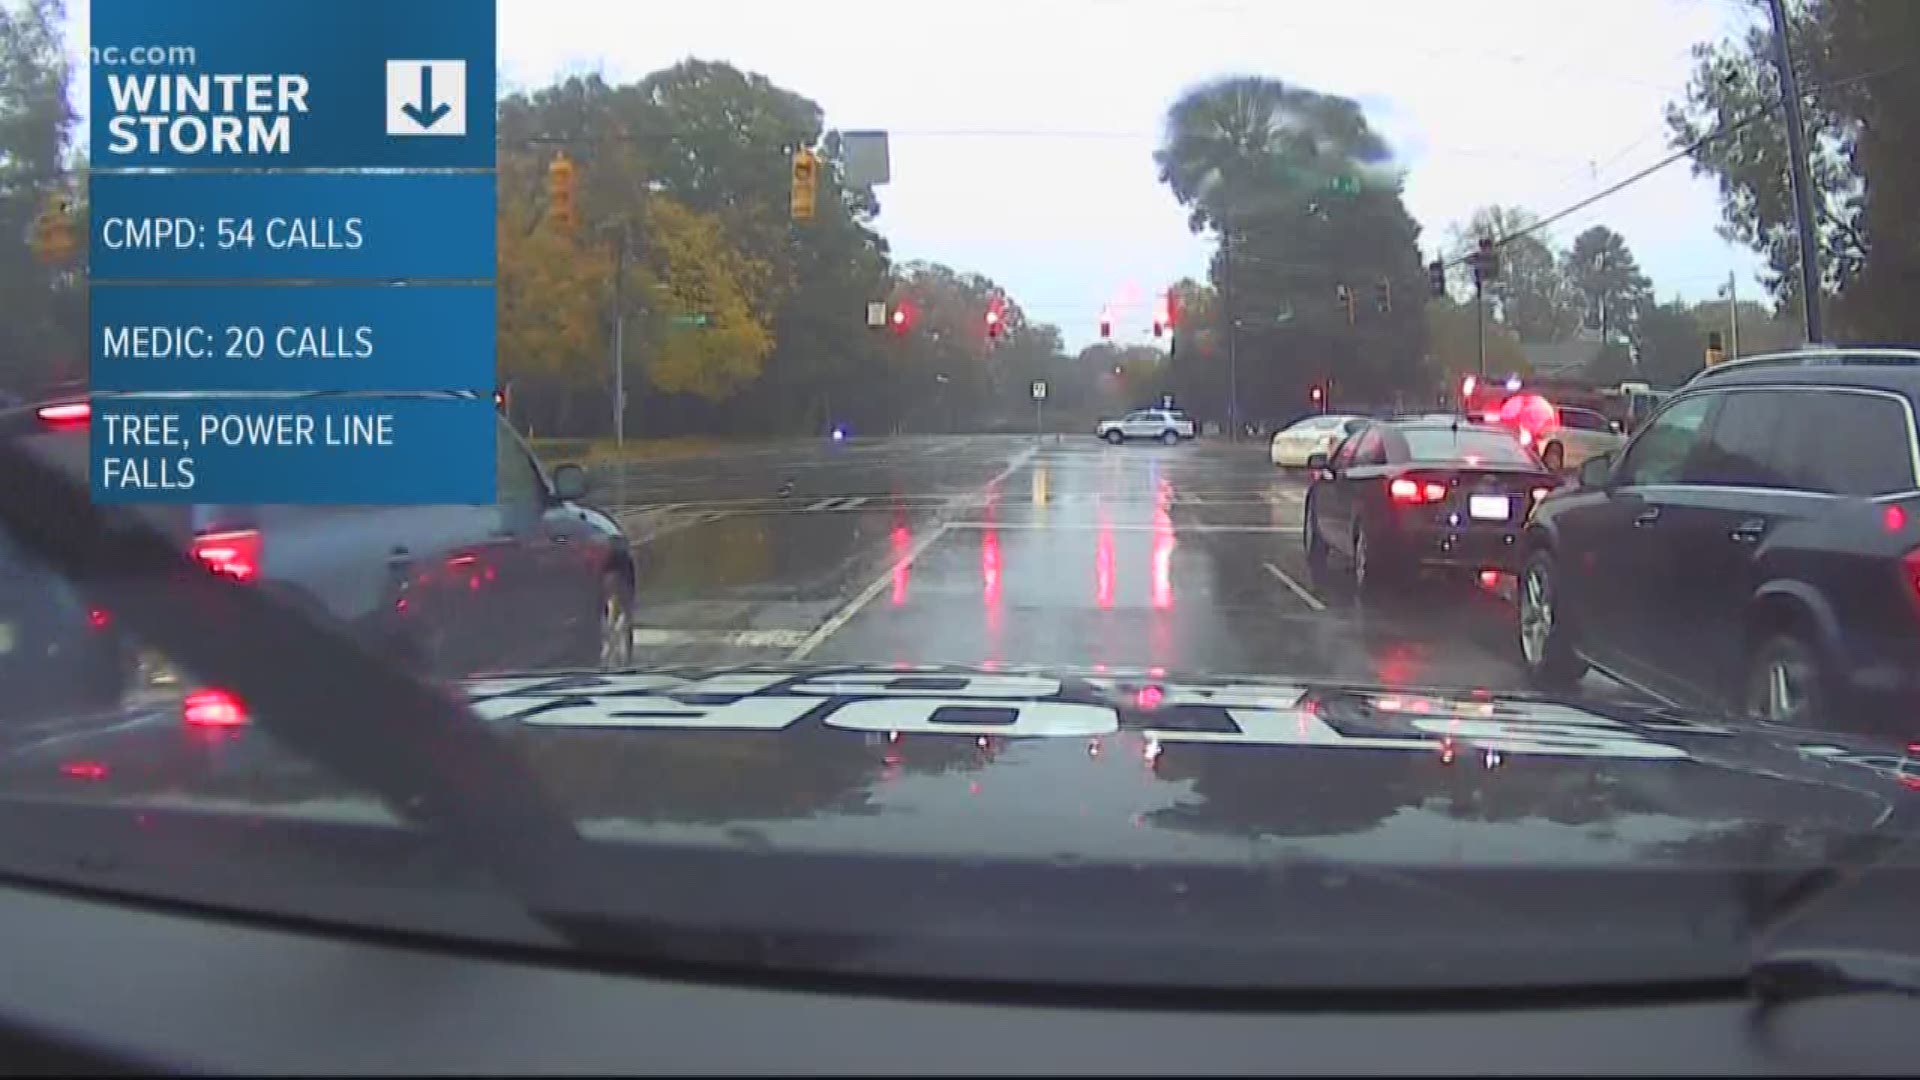 There were dozens of reports of downed trees, power lines and crashes across the Charlotte area during a wet and messy commute Thursday.